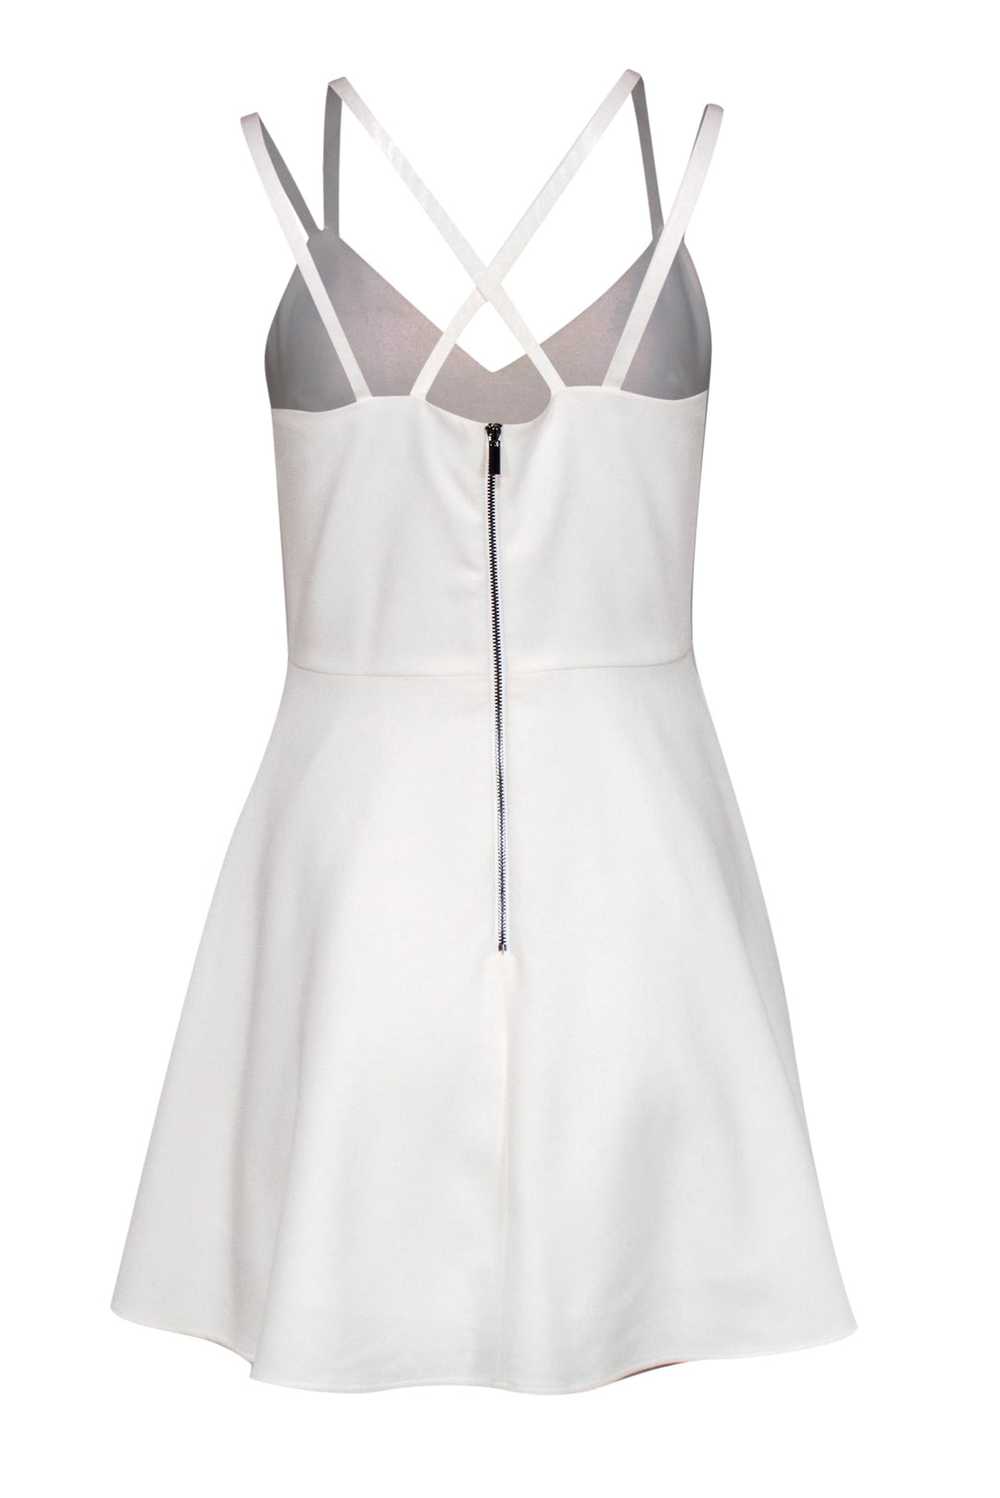 French Connection - Ivory Crisscross Strap Fit & … - image 3